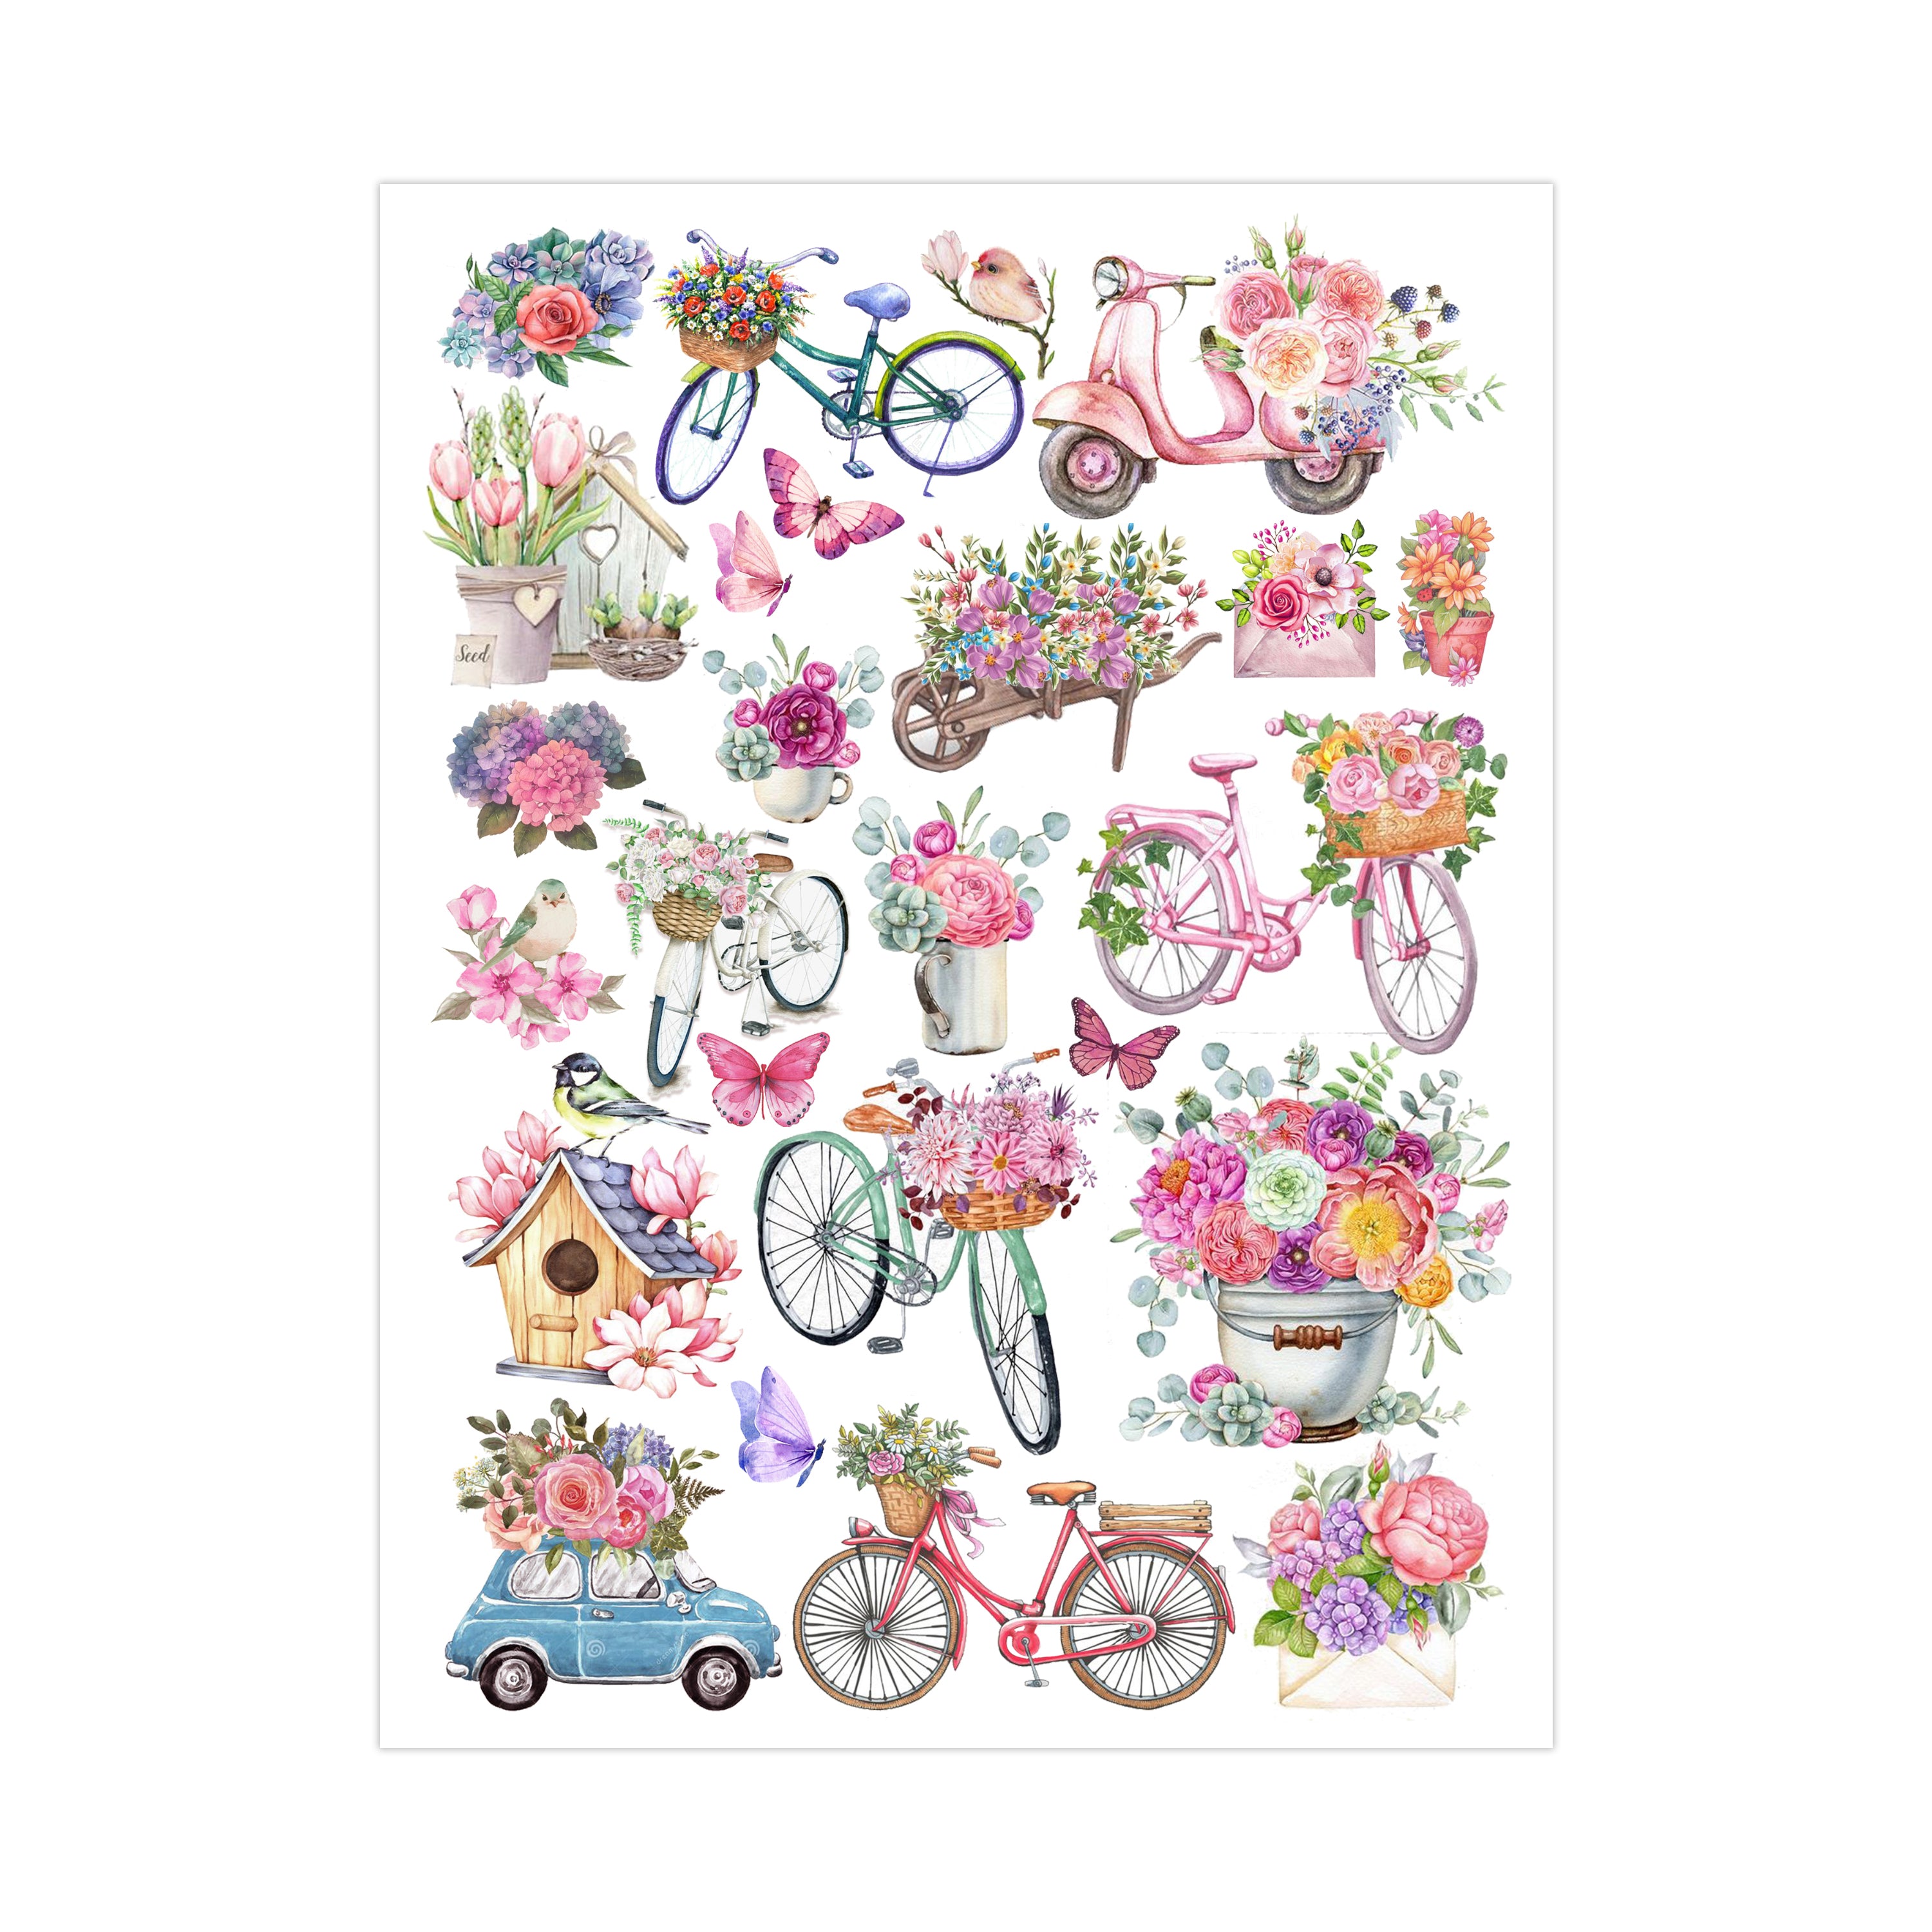 Deco Transfer Sheet Bikes And Blooms 10Inch X 7.5Inch 1Pc Lb